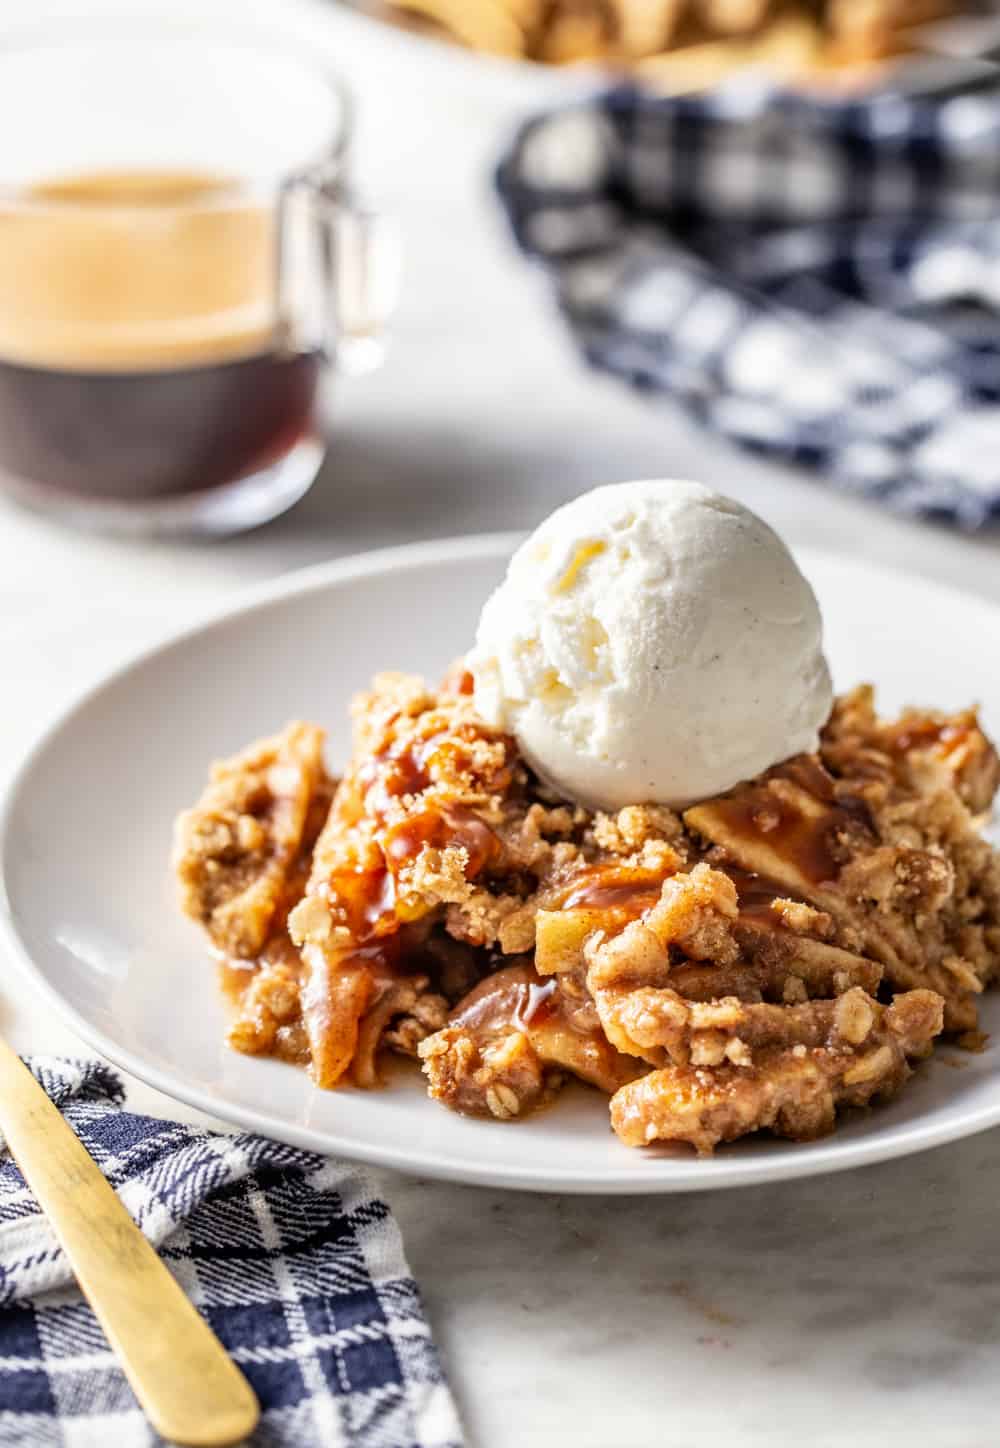 Caramel apple crisp topped with a scoop of vanilla ice cream on a white plate